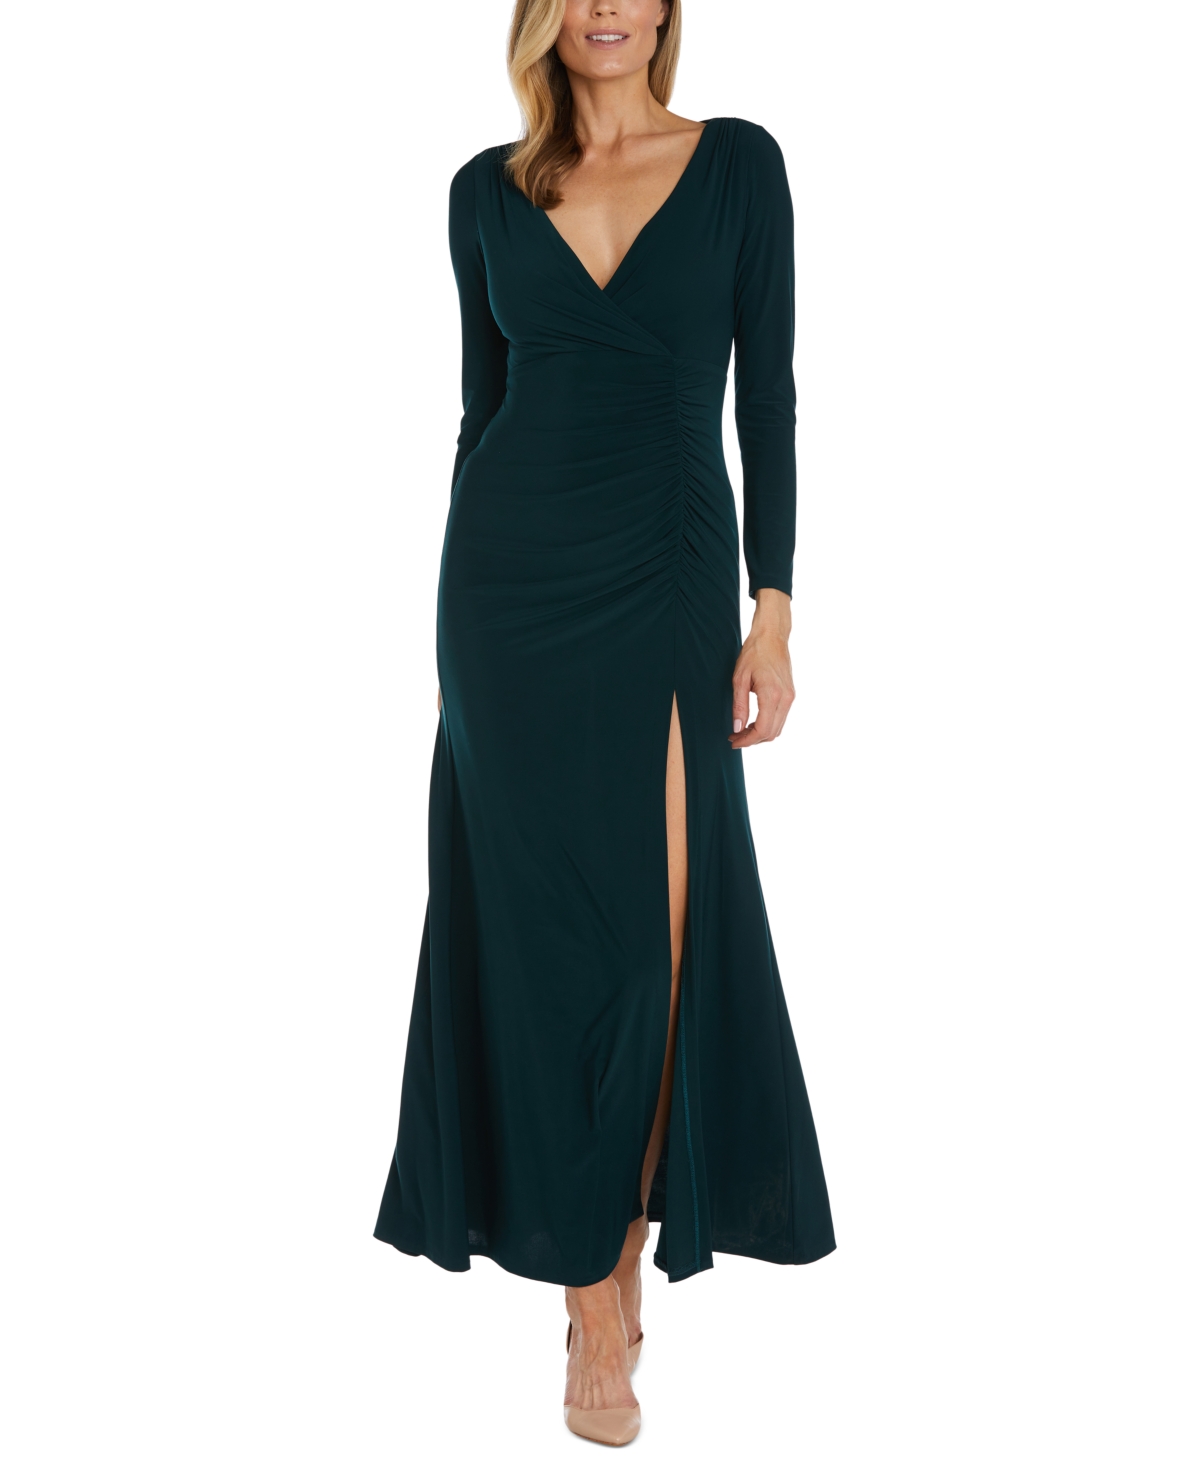 Nightway Women's V-neck Long-sleeve Ruched Dress In Hunter